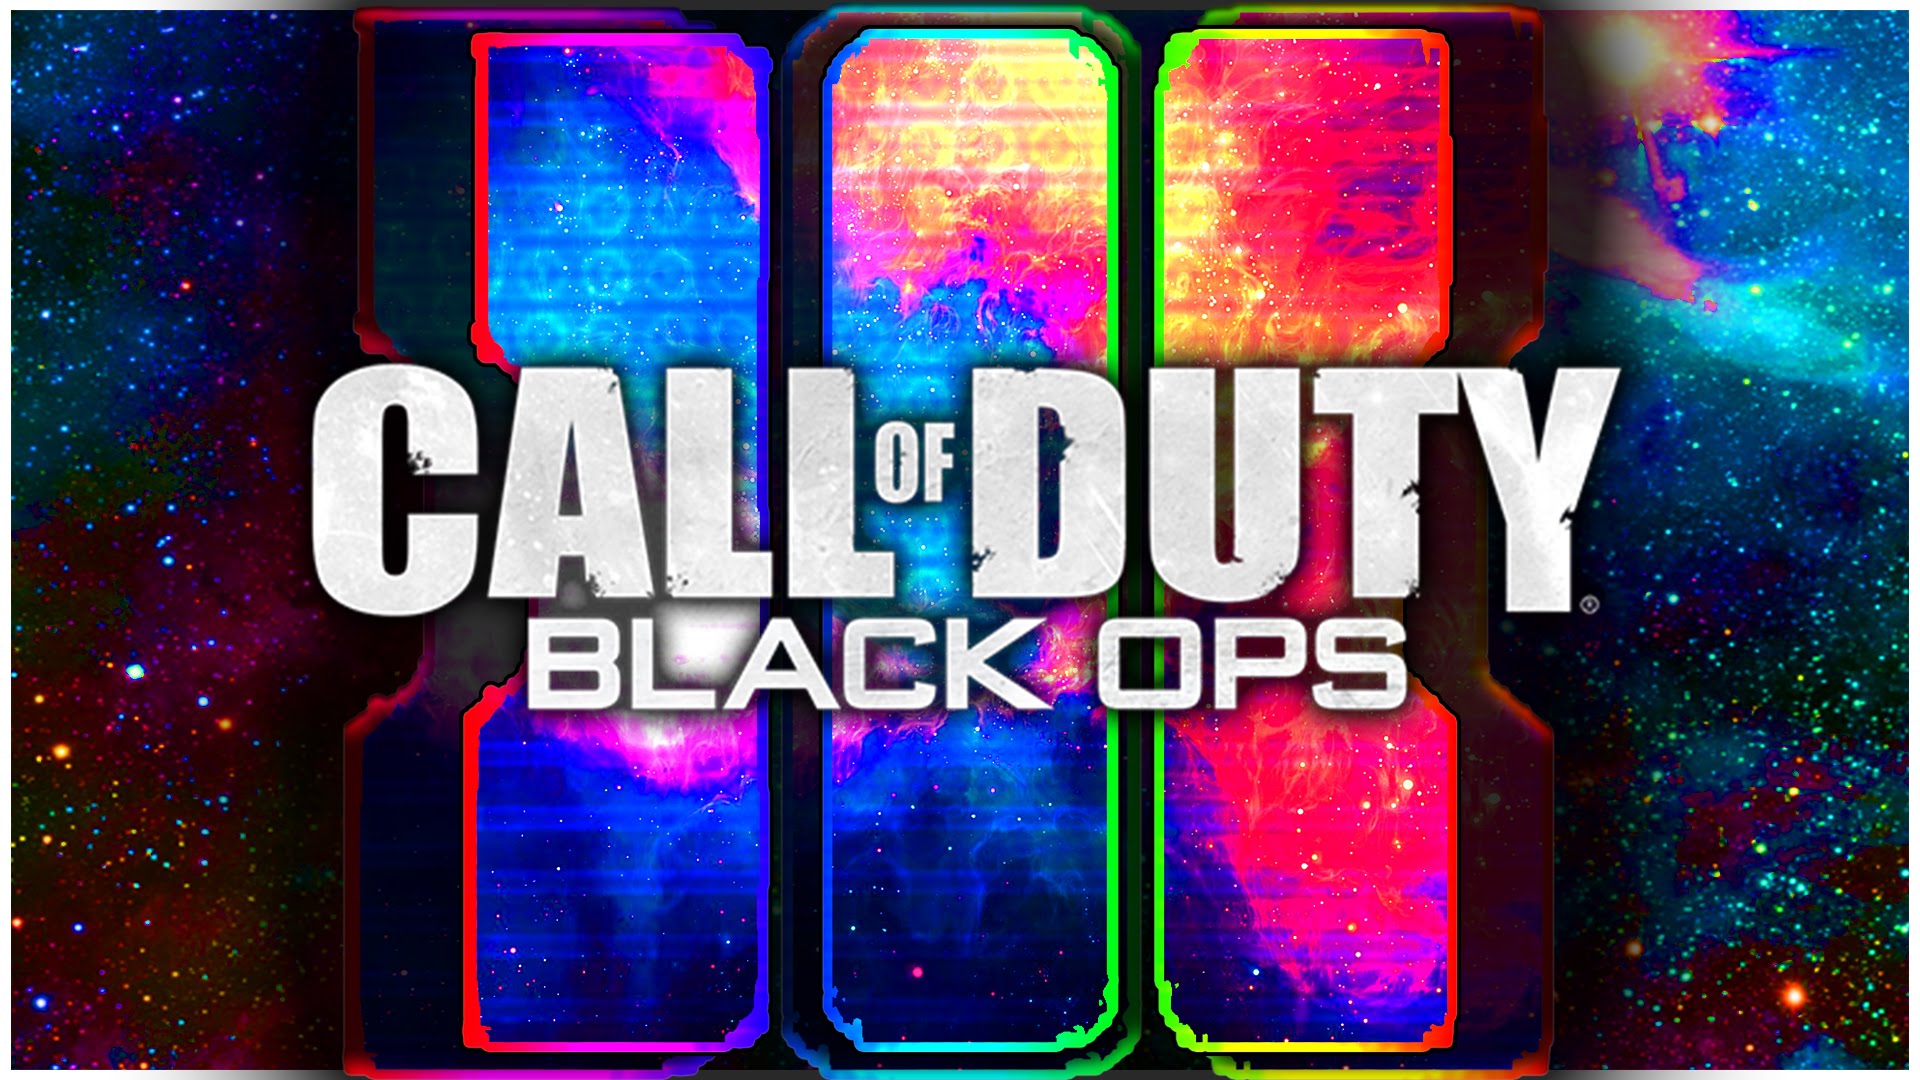 Call of Duty Black Ops III Download Full Game PC